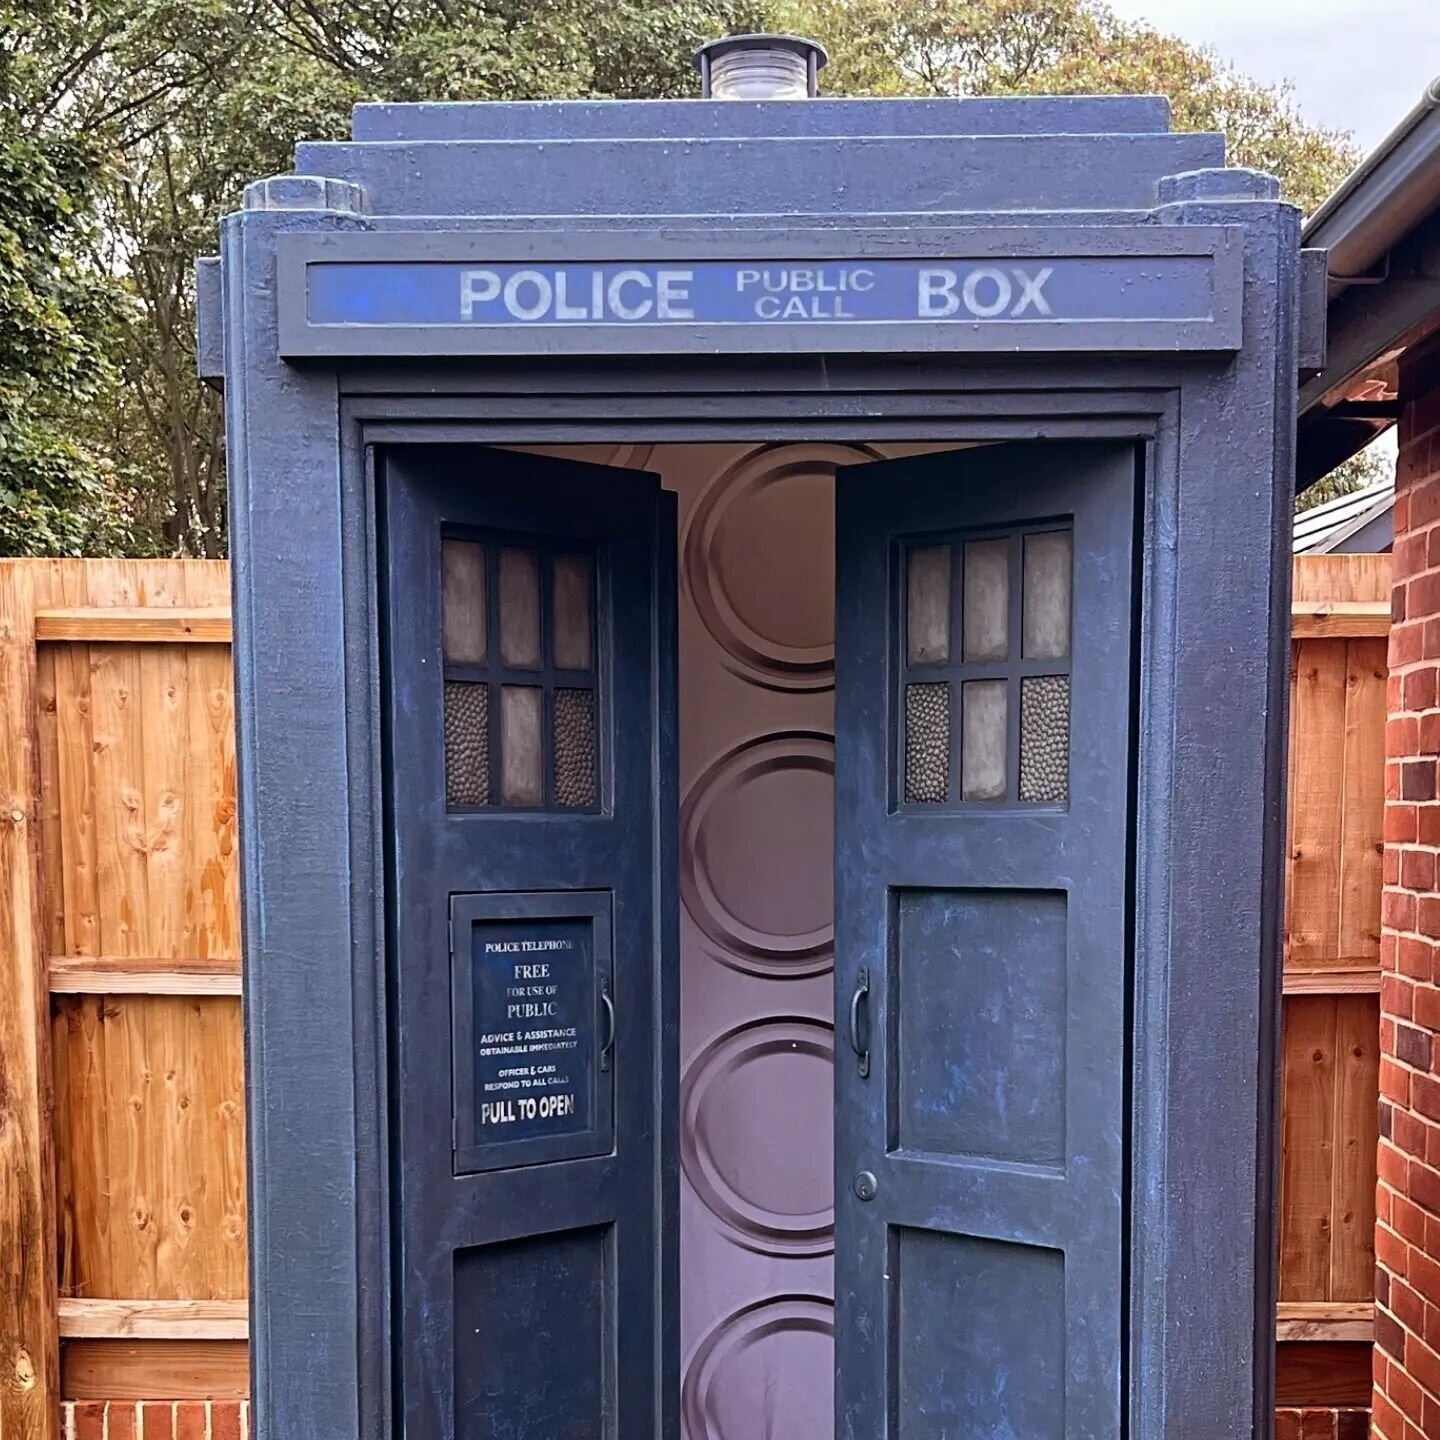 As the 60th&nbsp;Anniversary looms, and #DoctorWho returns this November, how fitting to assist a Time Lord with his very own TARDIS ✨️

&ldquo;Hello Claire and the team! Many, many thanks for your brilliant service in adjusting the size of the TARDI